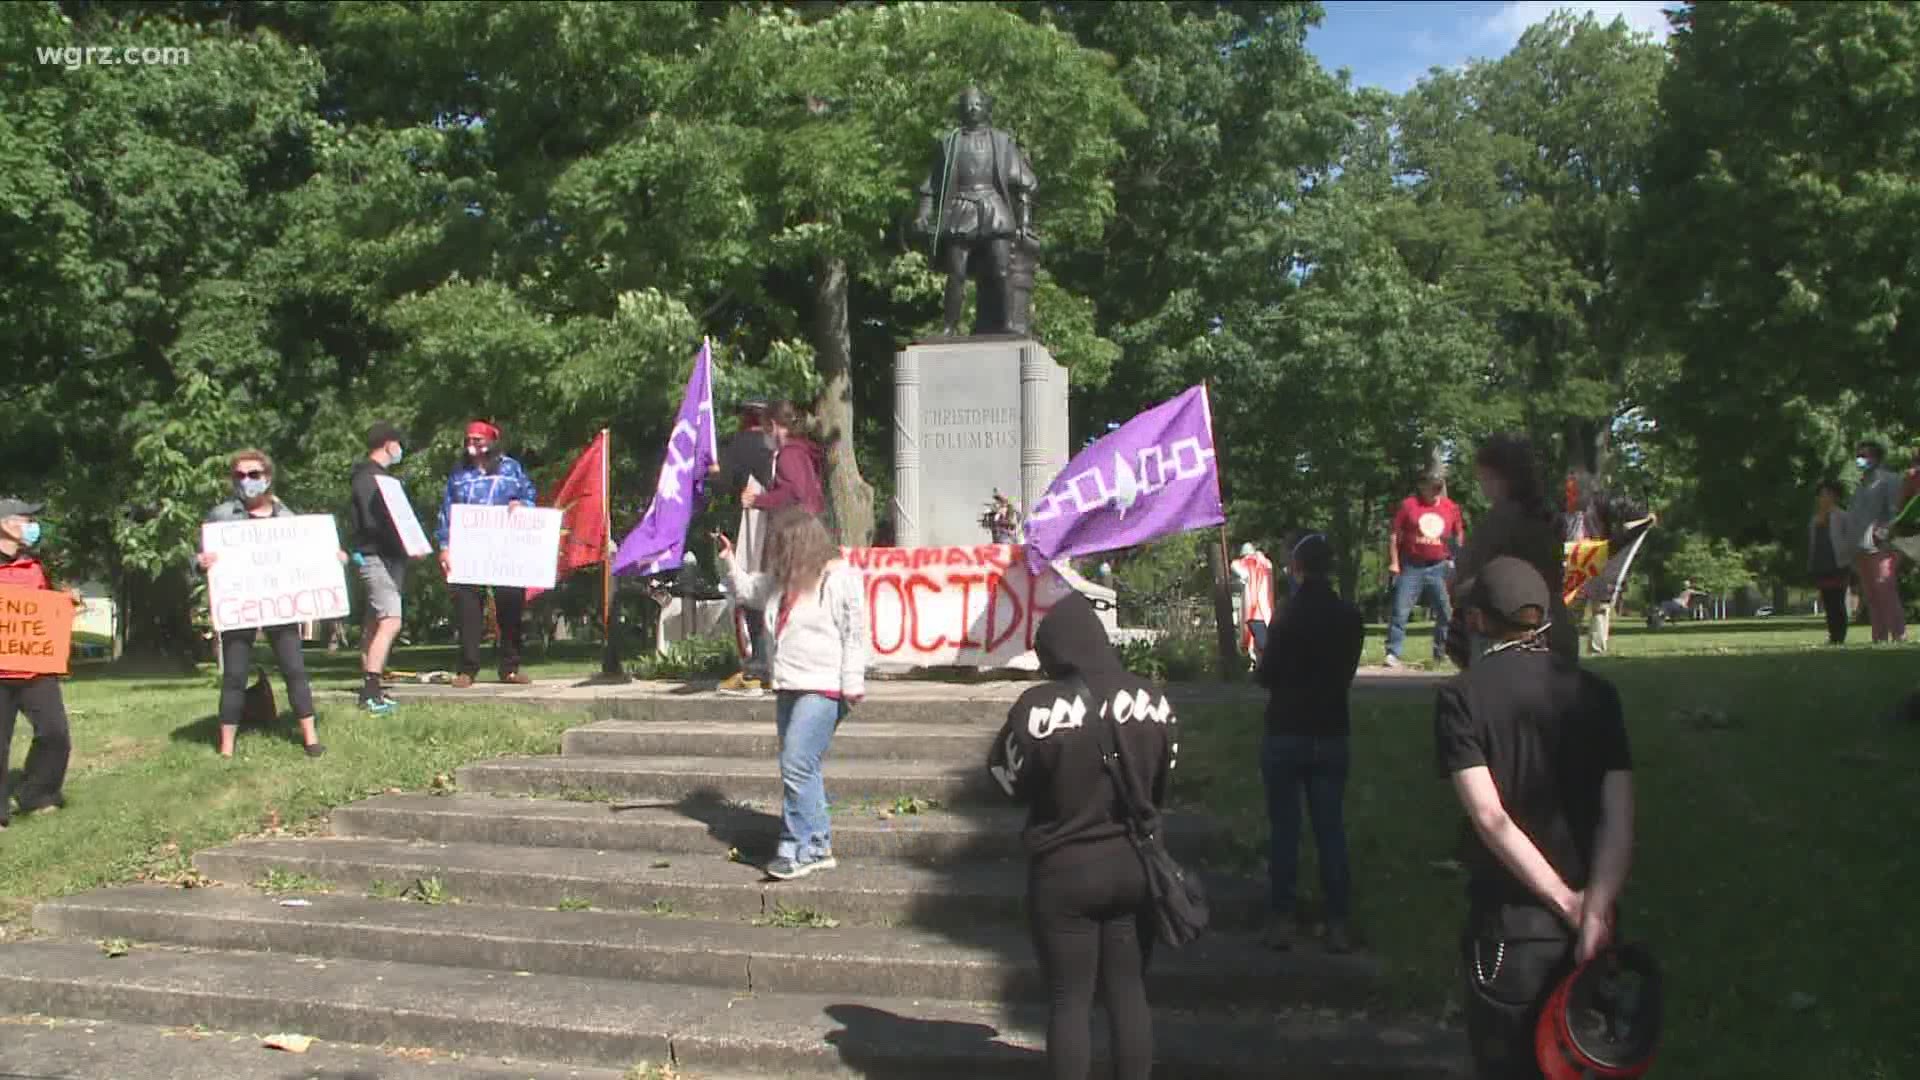 There have been a few campaigns to get rid of the statue with advocates pointing to Columbus' role in the deaths of so many native Americans.